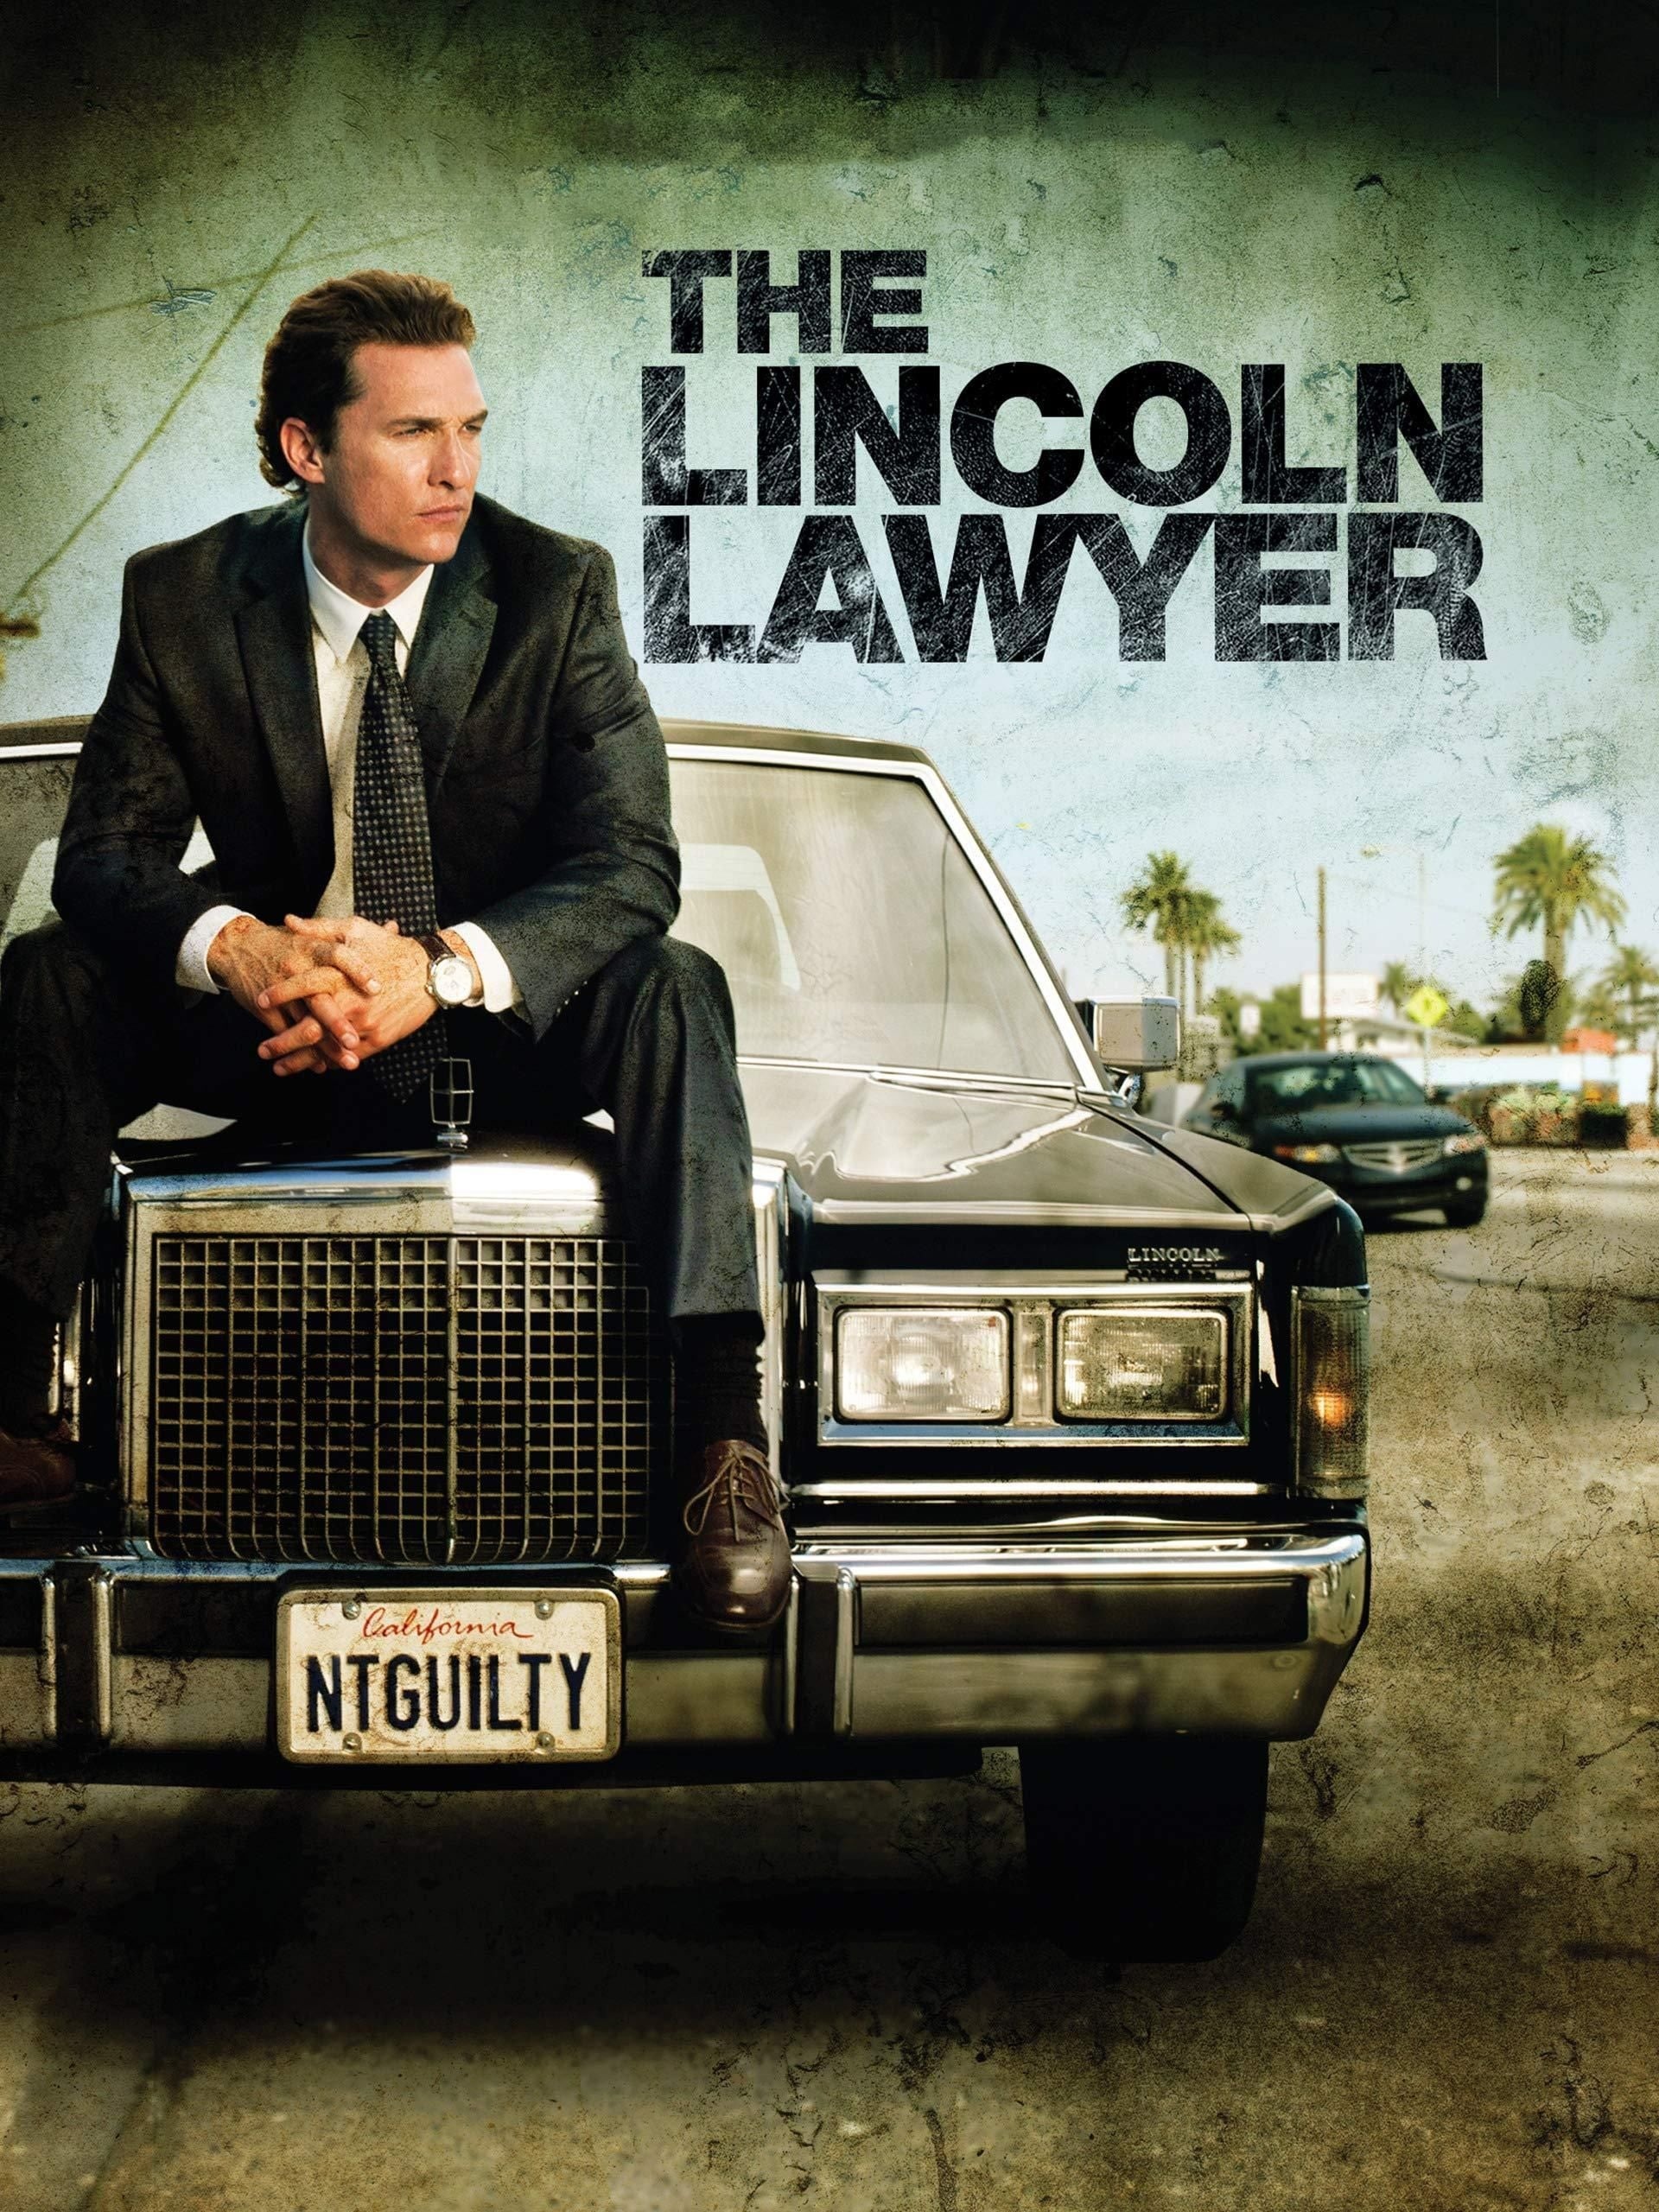 The Lincoln Lawyer: American legal thriller film, Released on March 18, 2011. 1920x2560 HD Wallpaper.